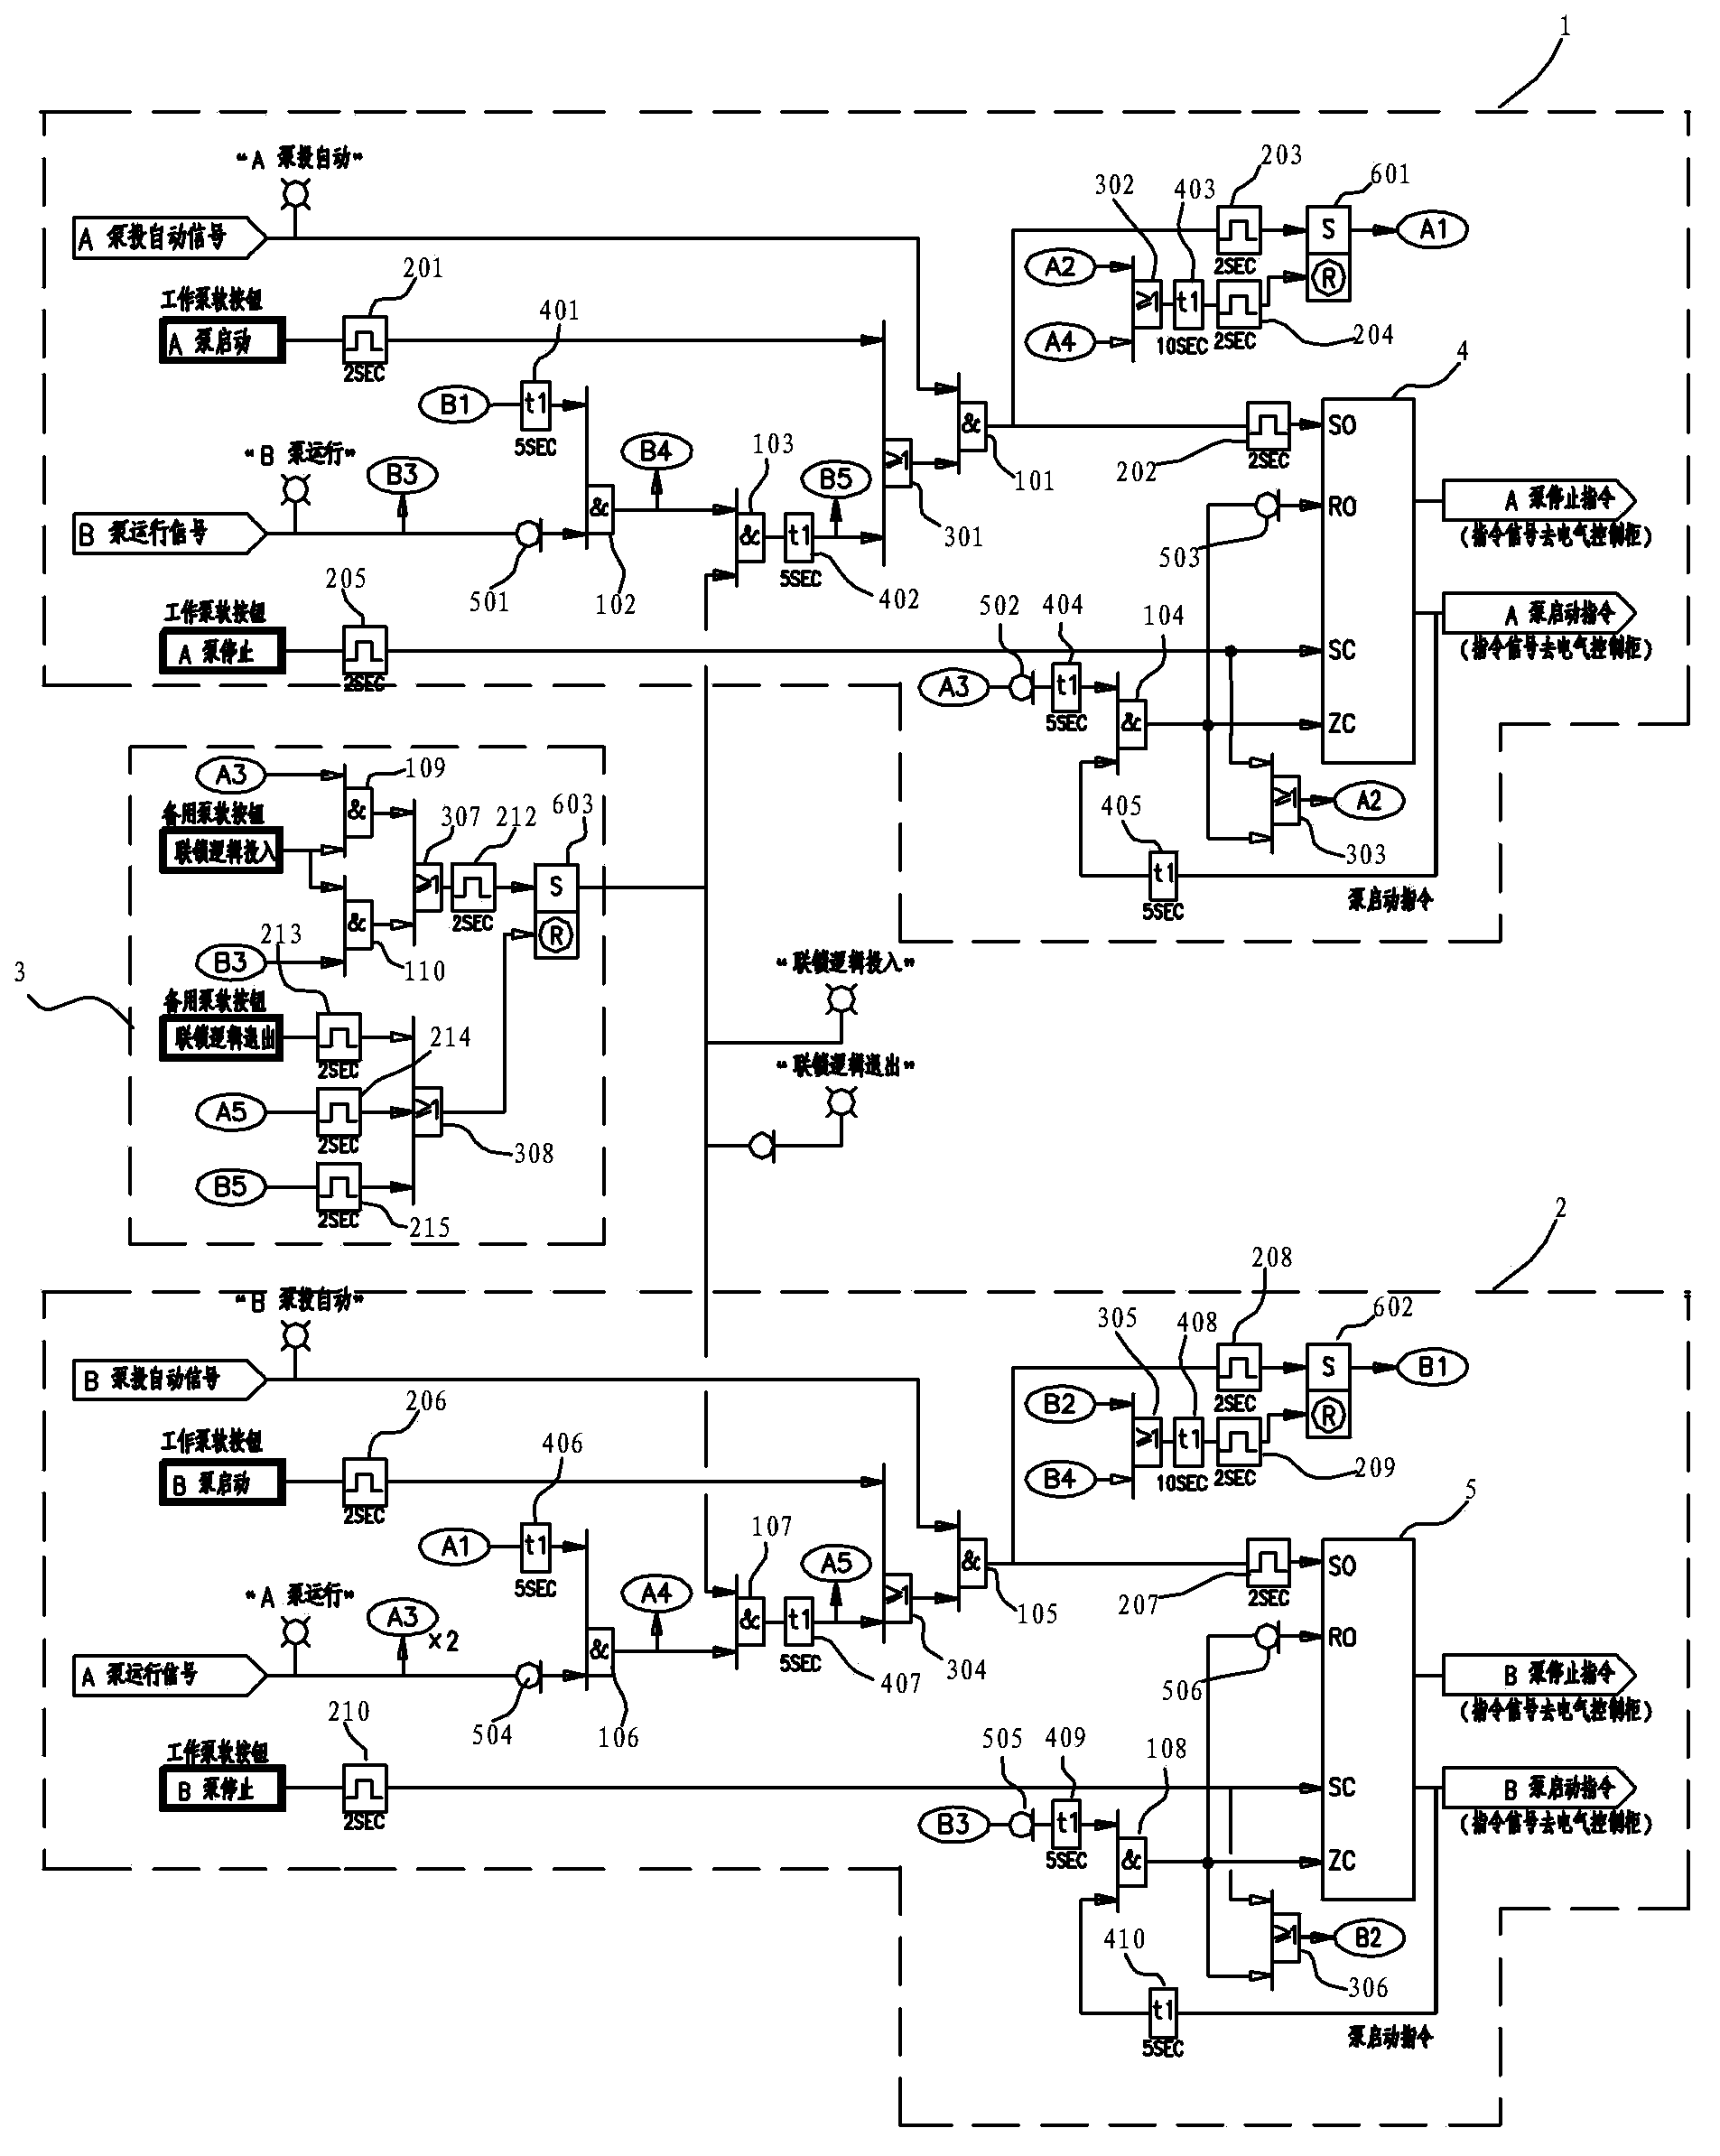 Stand-by pump automatically-starting control logic device with two pumps mutually serving as stand-by pumps